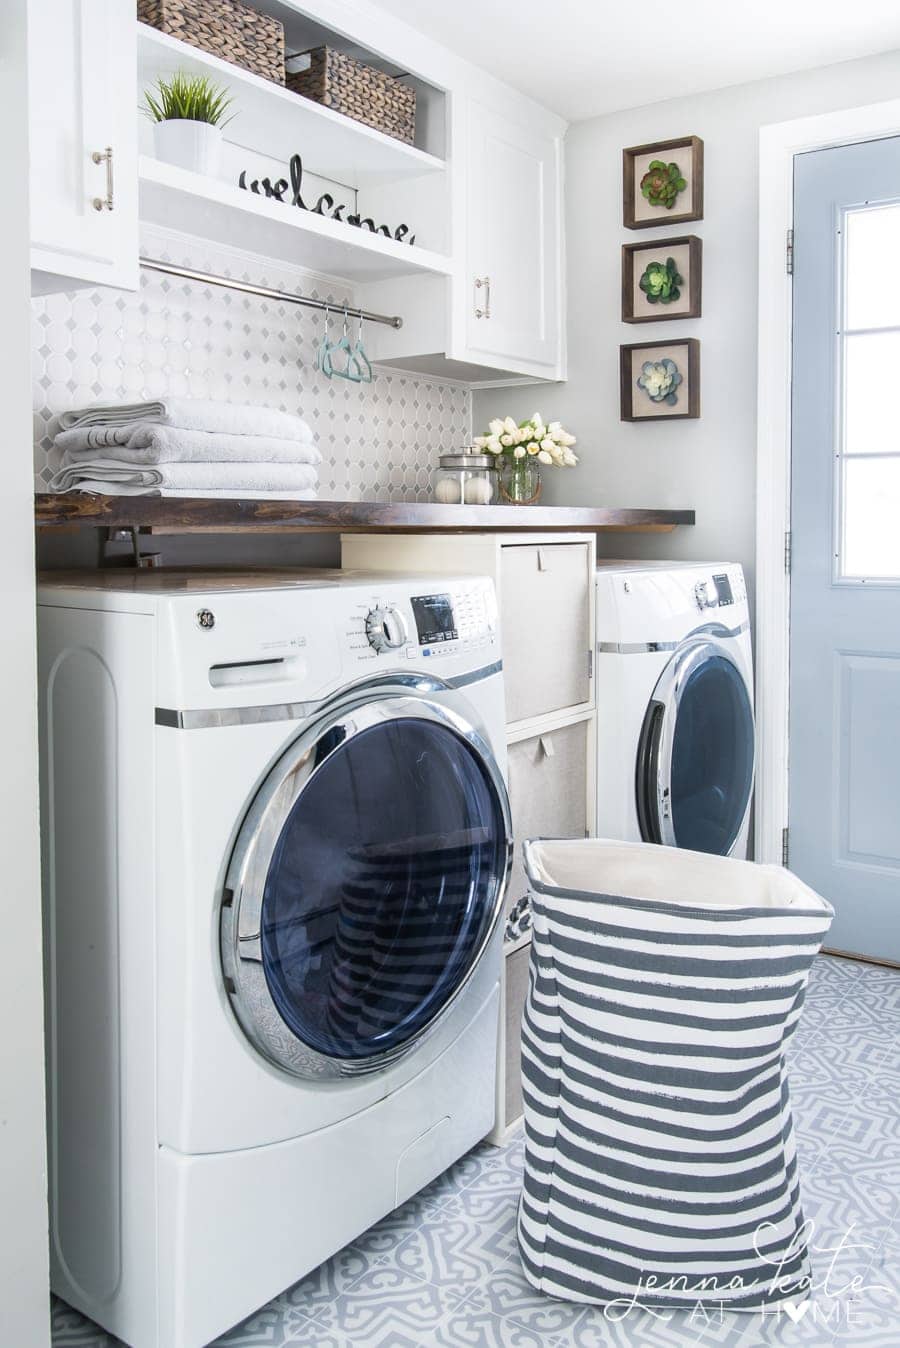 A washer and dryer with a new wooden countertop built above; laundry hamper is resting in front.